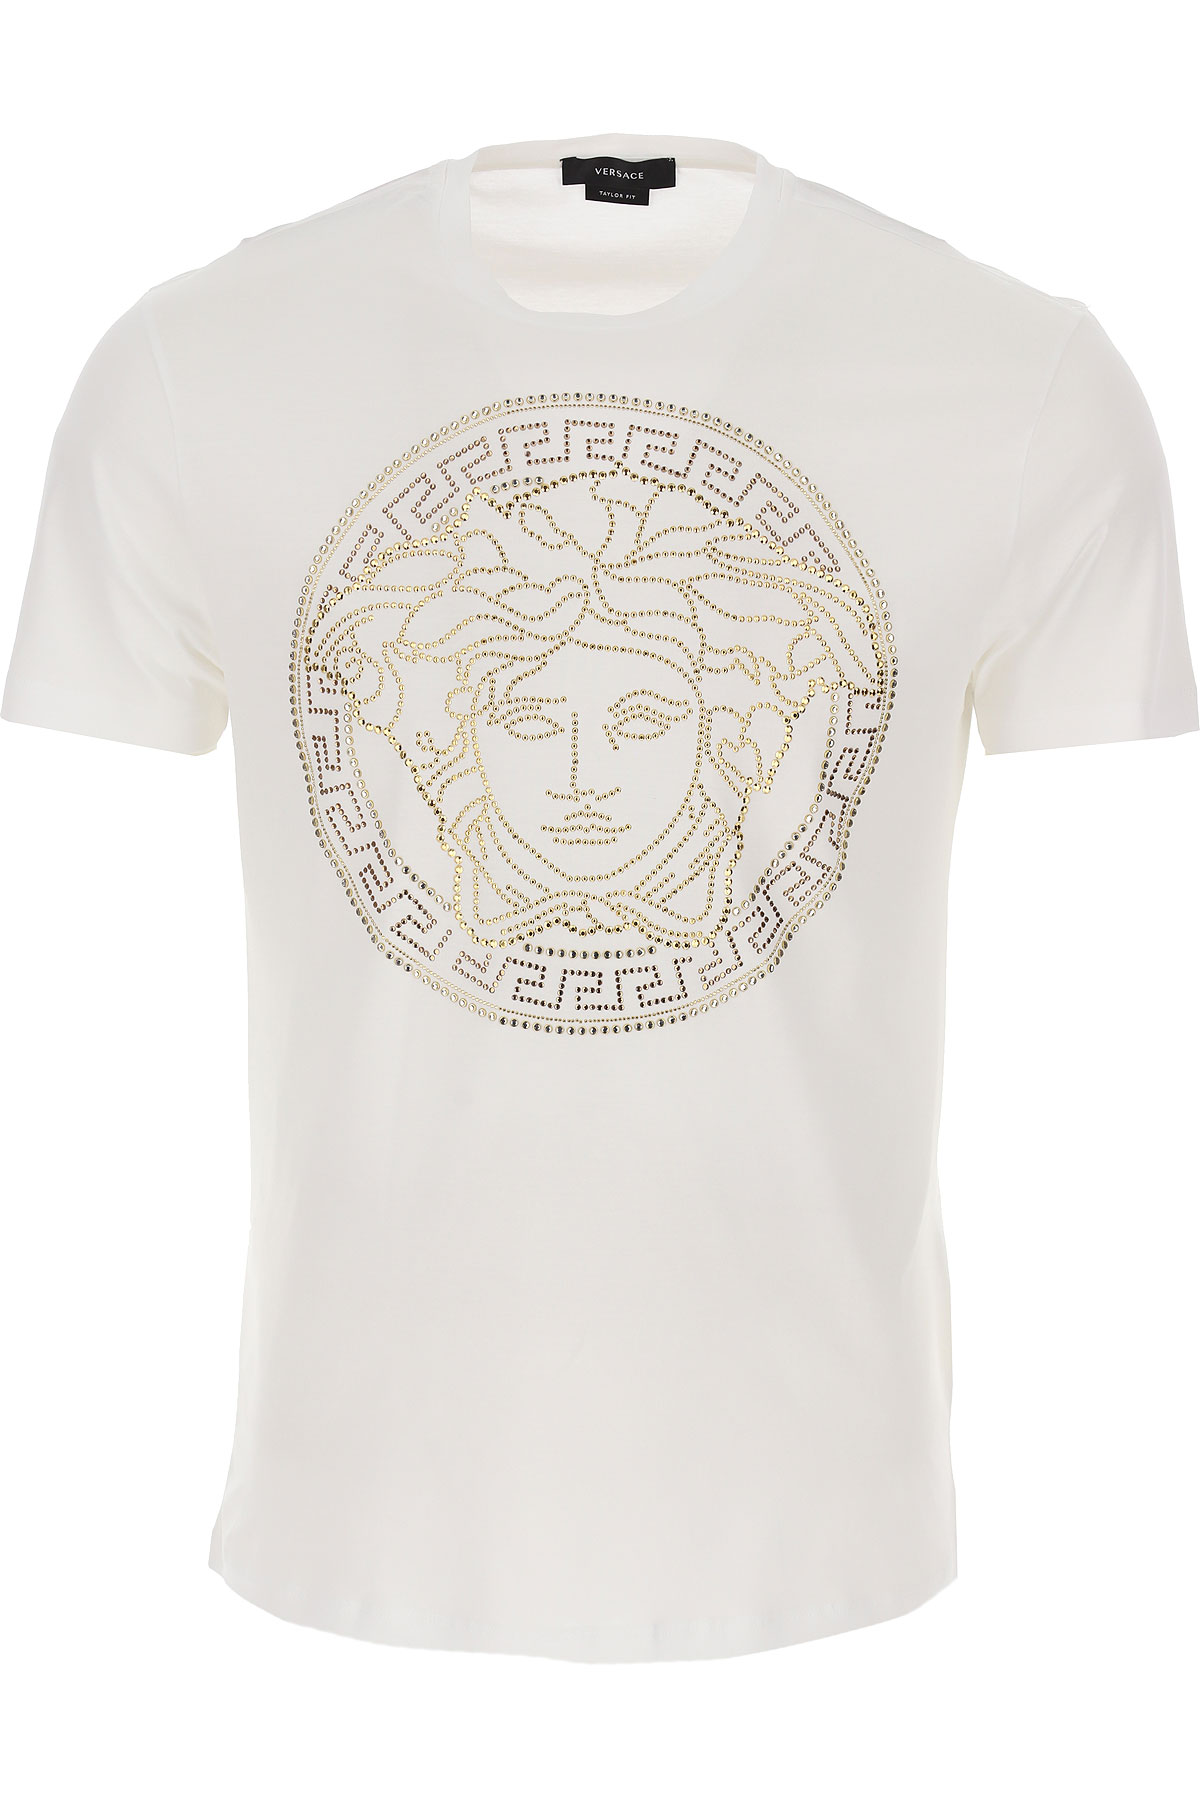 Mens Clothing Versace, Style code: a77987-a201952-a1001